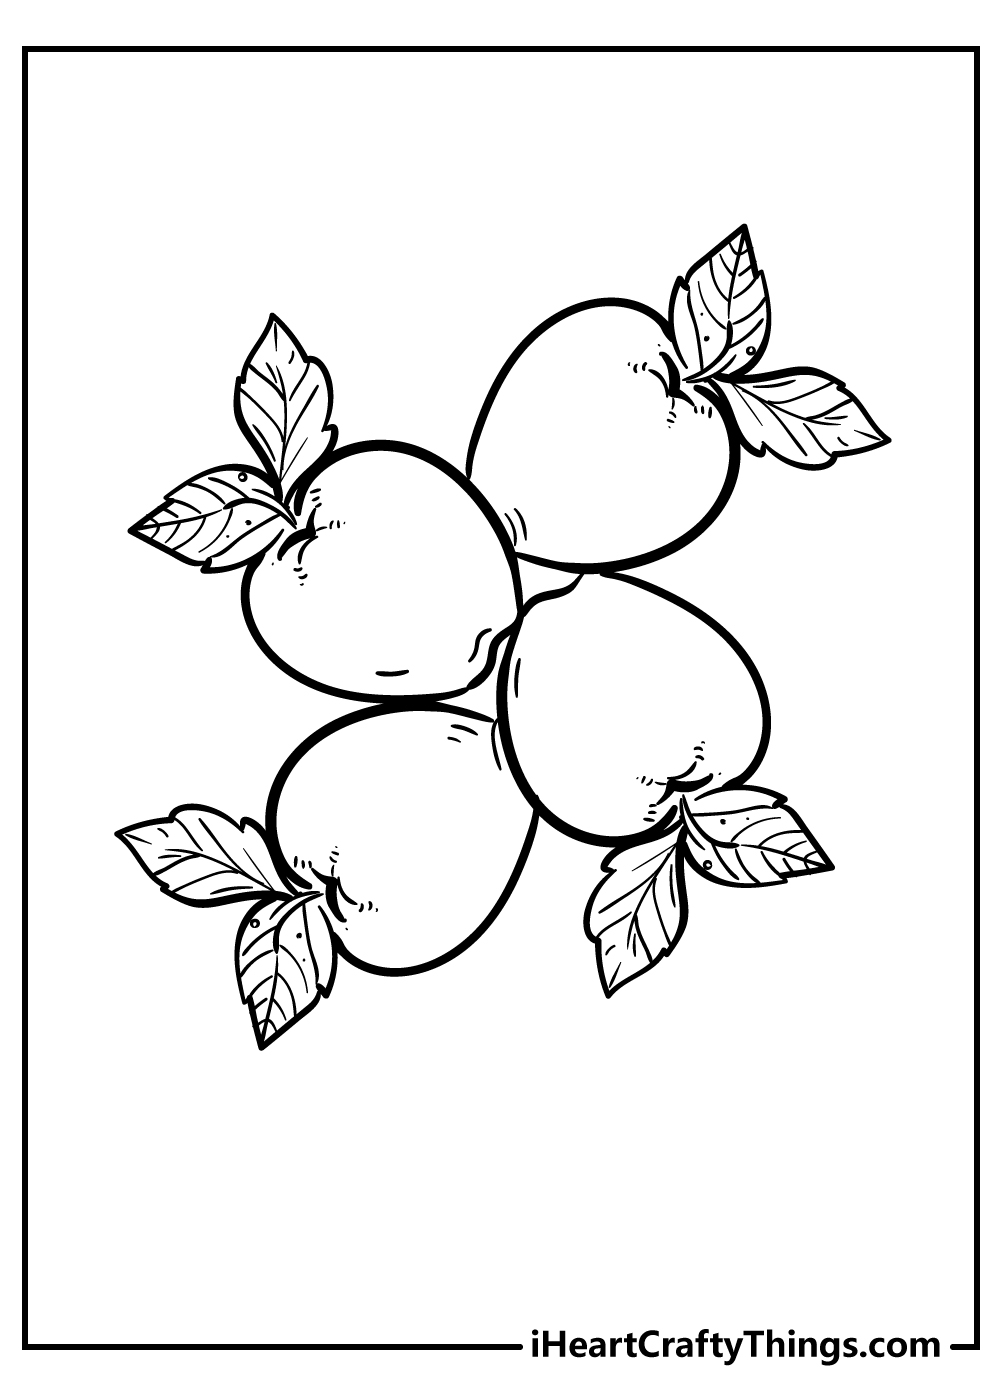 Apple Coloring Pages free pdf for adults